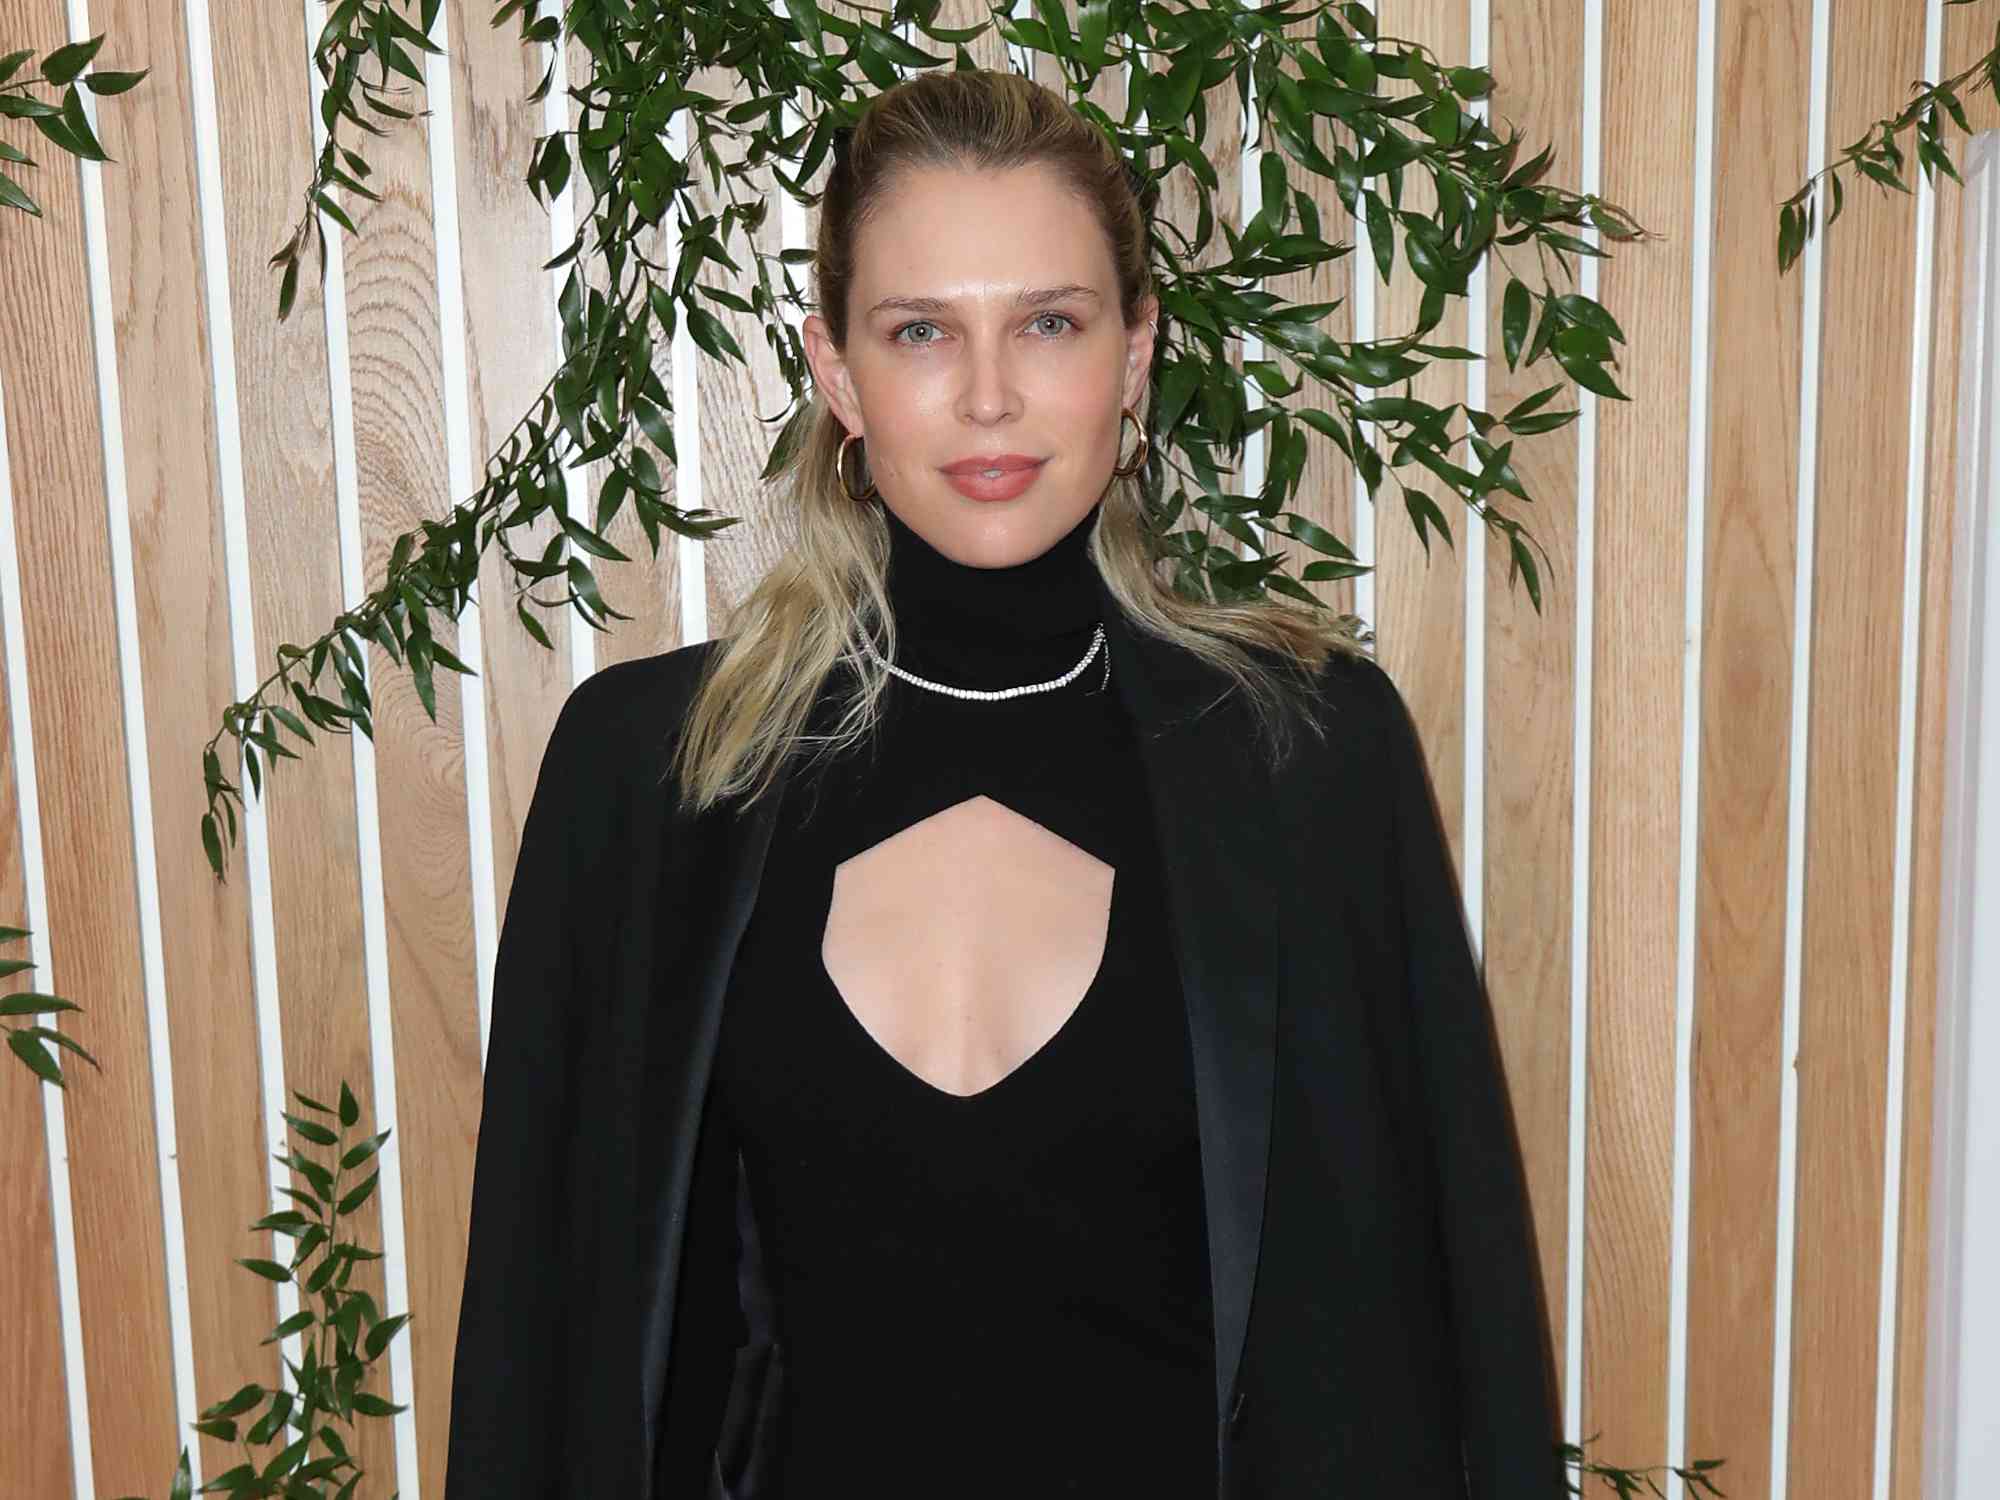 Sara Foster attends 1 Hotel West Hollywood Grand Opening Event at 1 Hotel West Hollywood on November 05, 2019 in West Hollywood, California